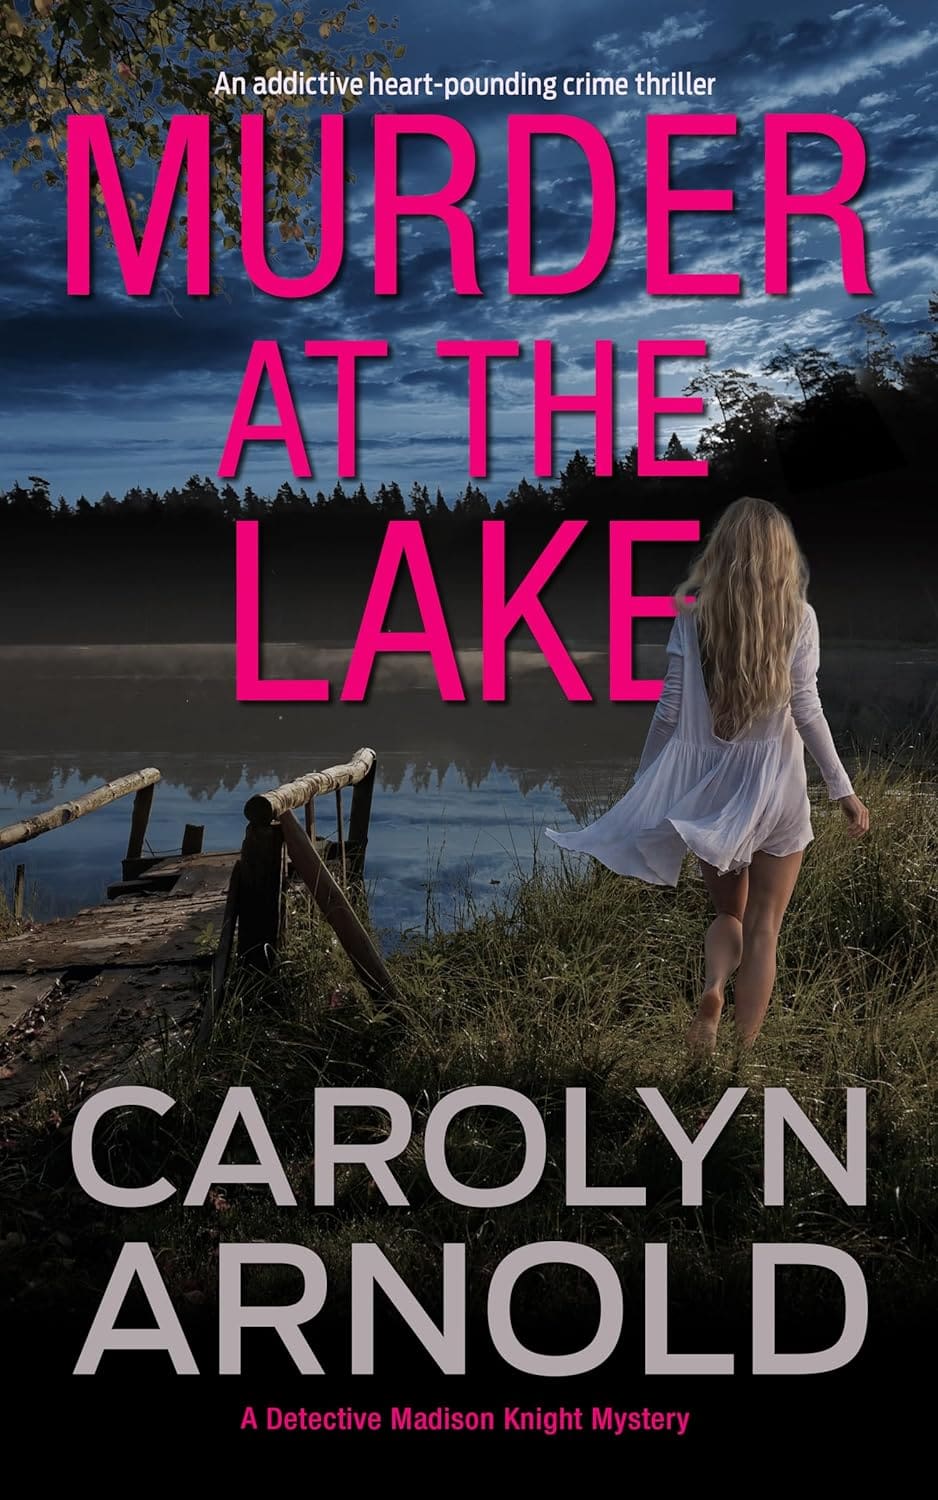 Murder at the Lake book cover by Carolyn Arnold of a blonde woman walking barefoot through tall grass next to a lake with an old wood dock